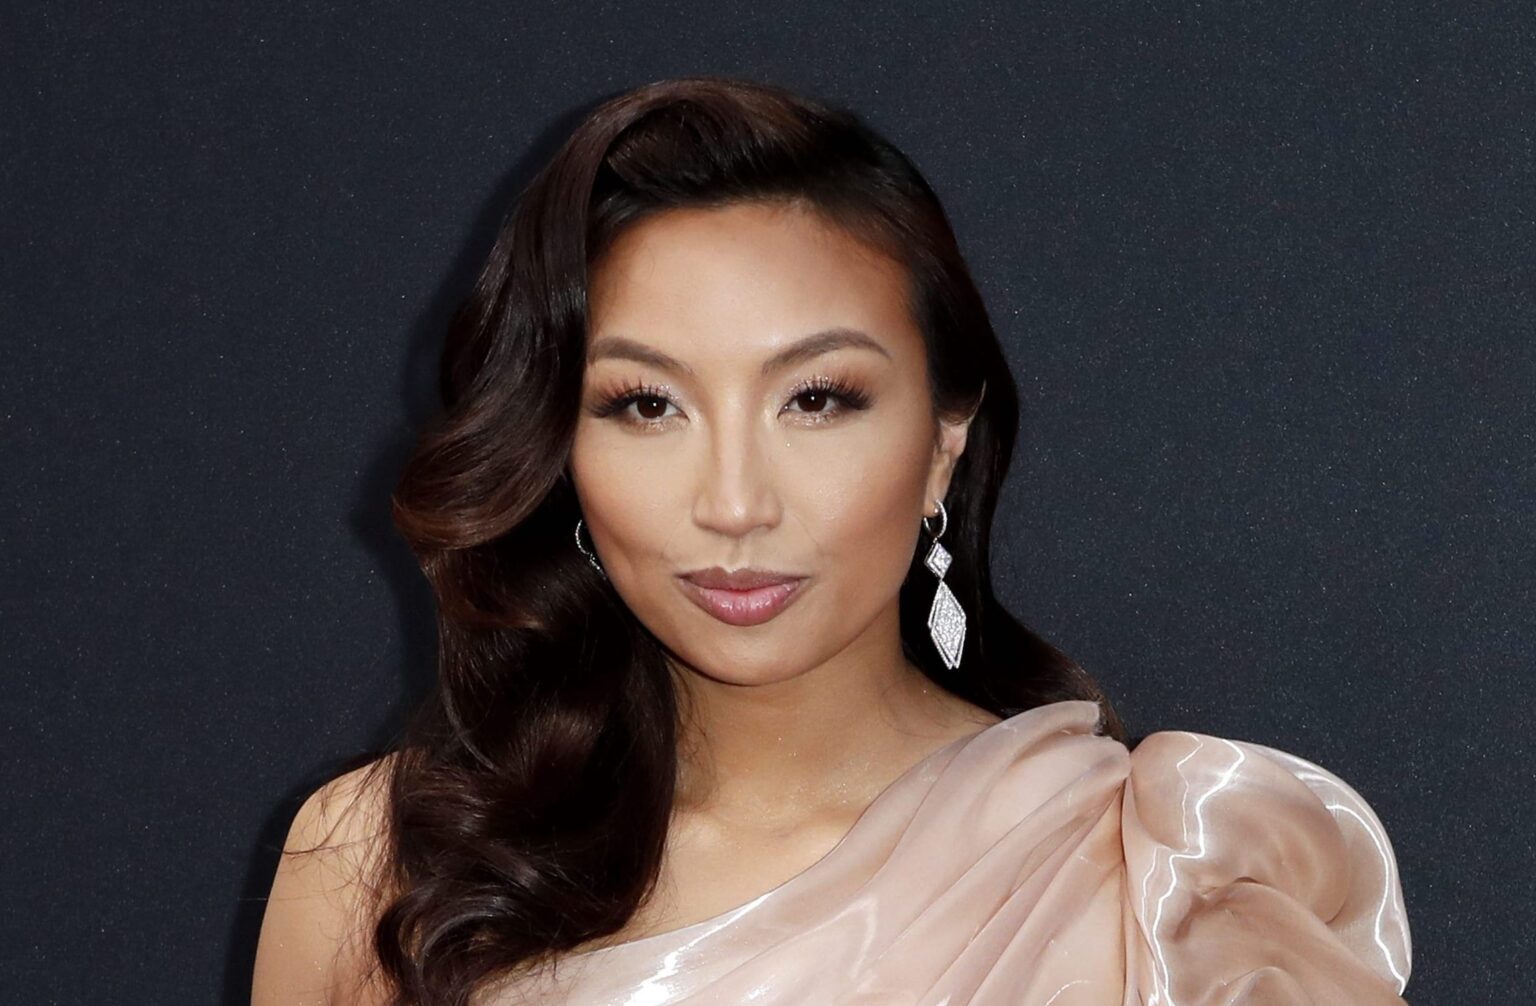 Jeannie Mai is leaving 'Dancing With the Stars' to focus on her medical condition. Could this affect her net worth?